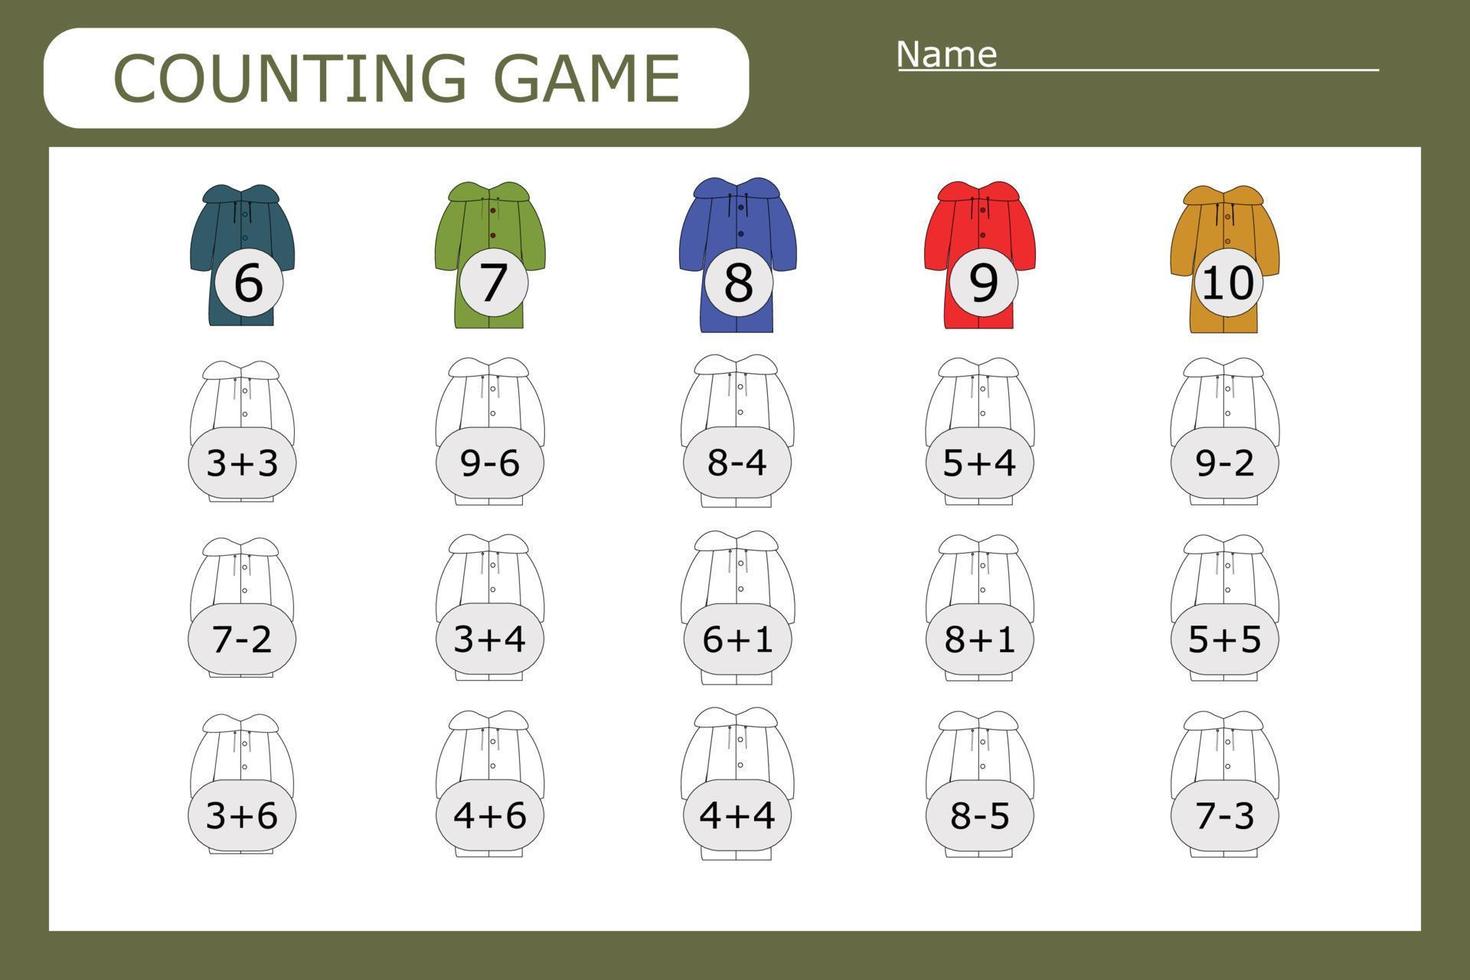 Educational game for children, kids. . Game learning math, counting game. Vector illustration for print, page